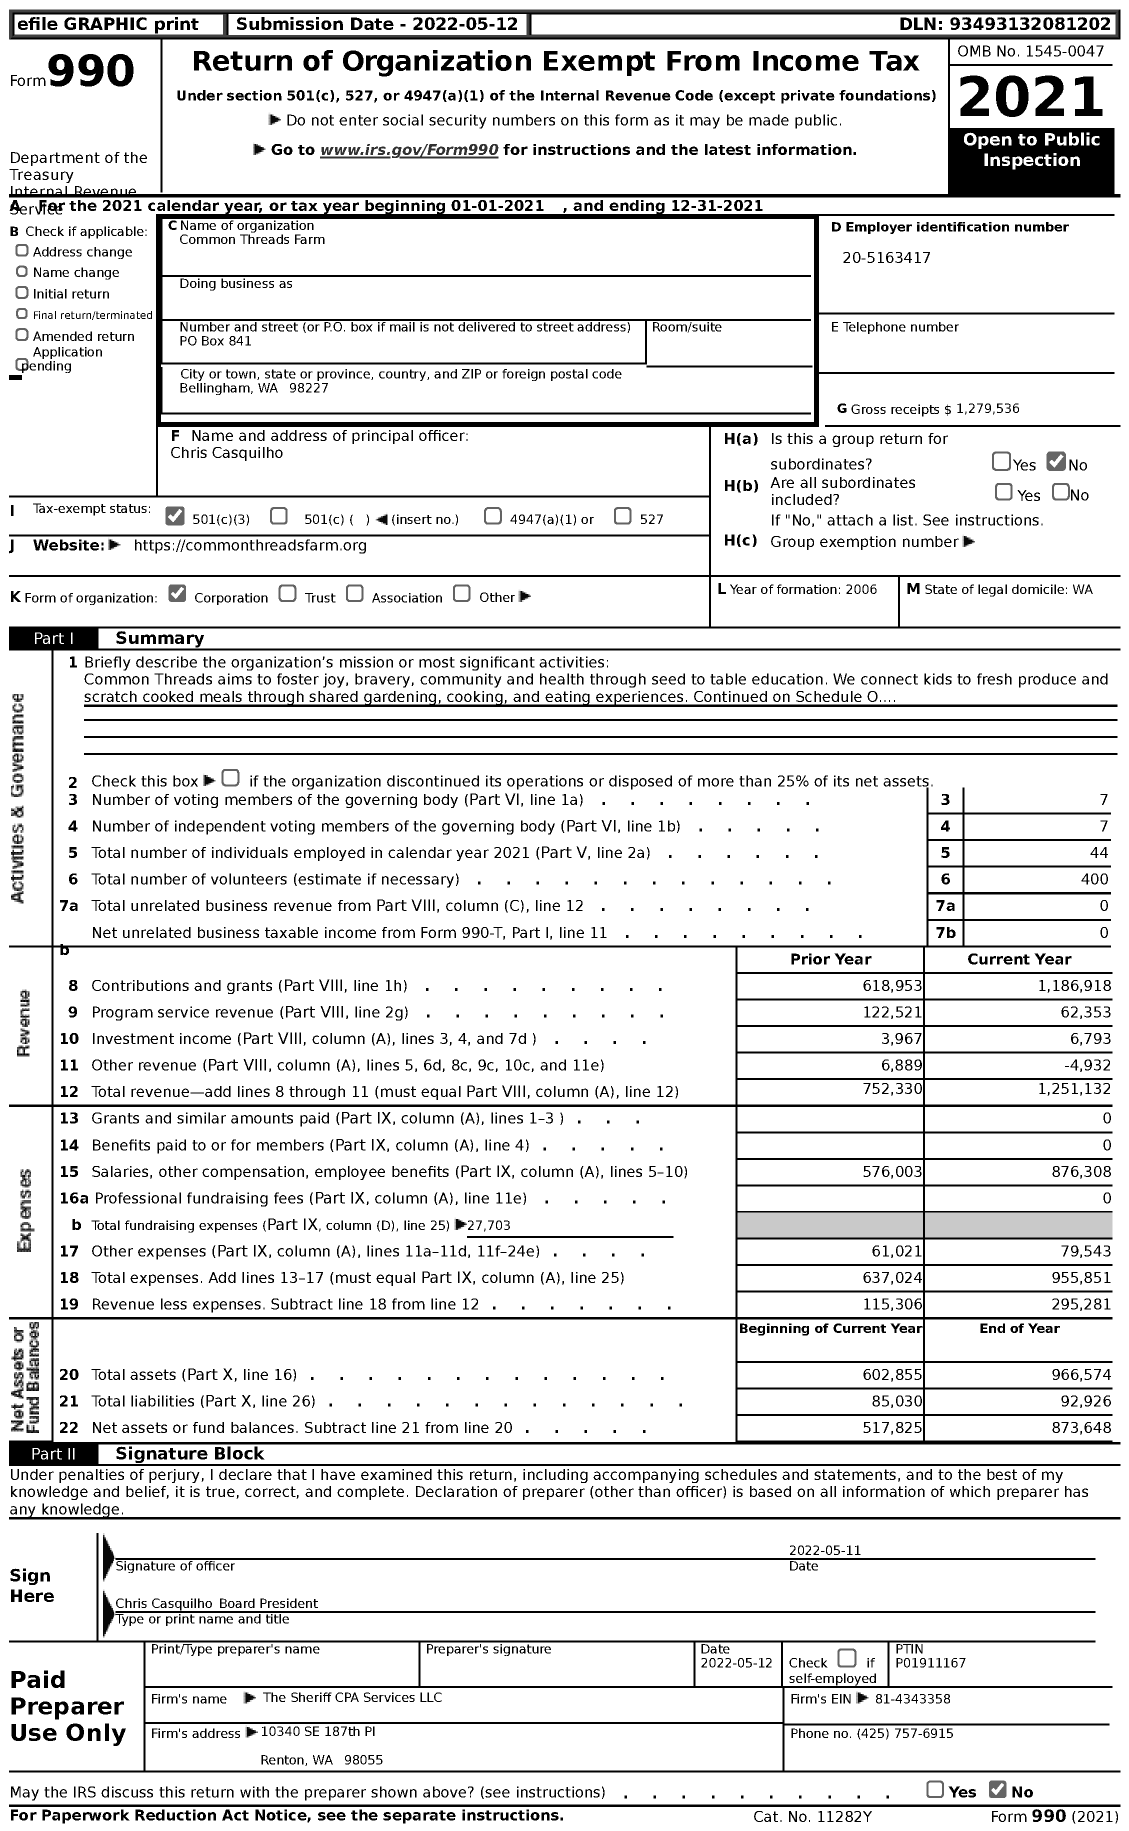 Image of first page of 2021 Form 990 for Common Threads Farm